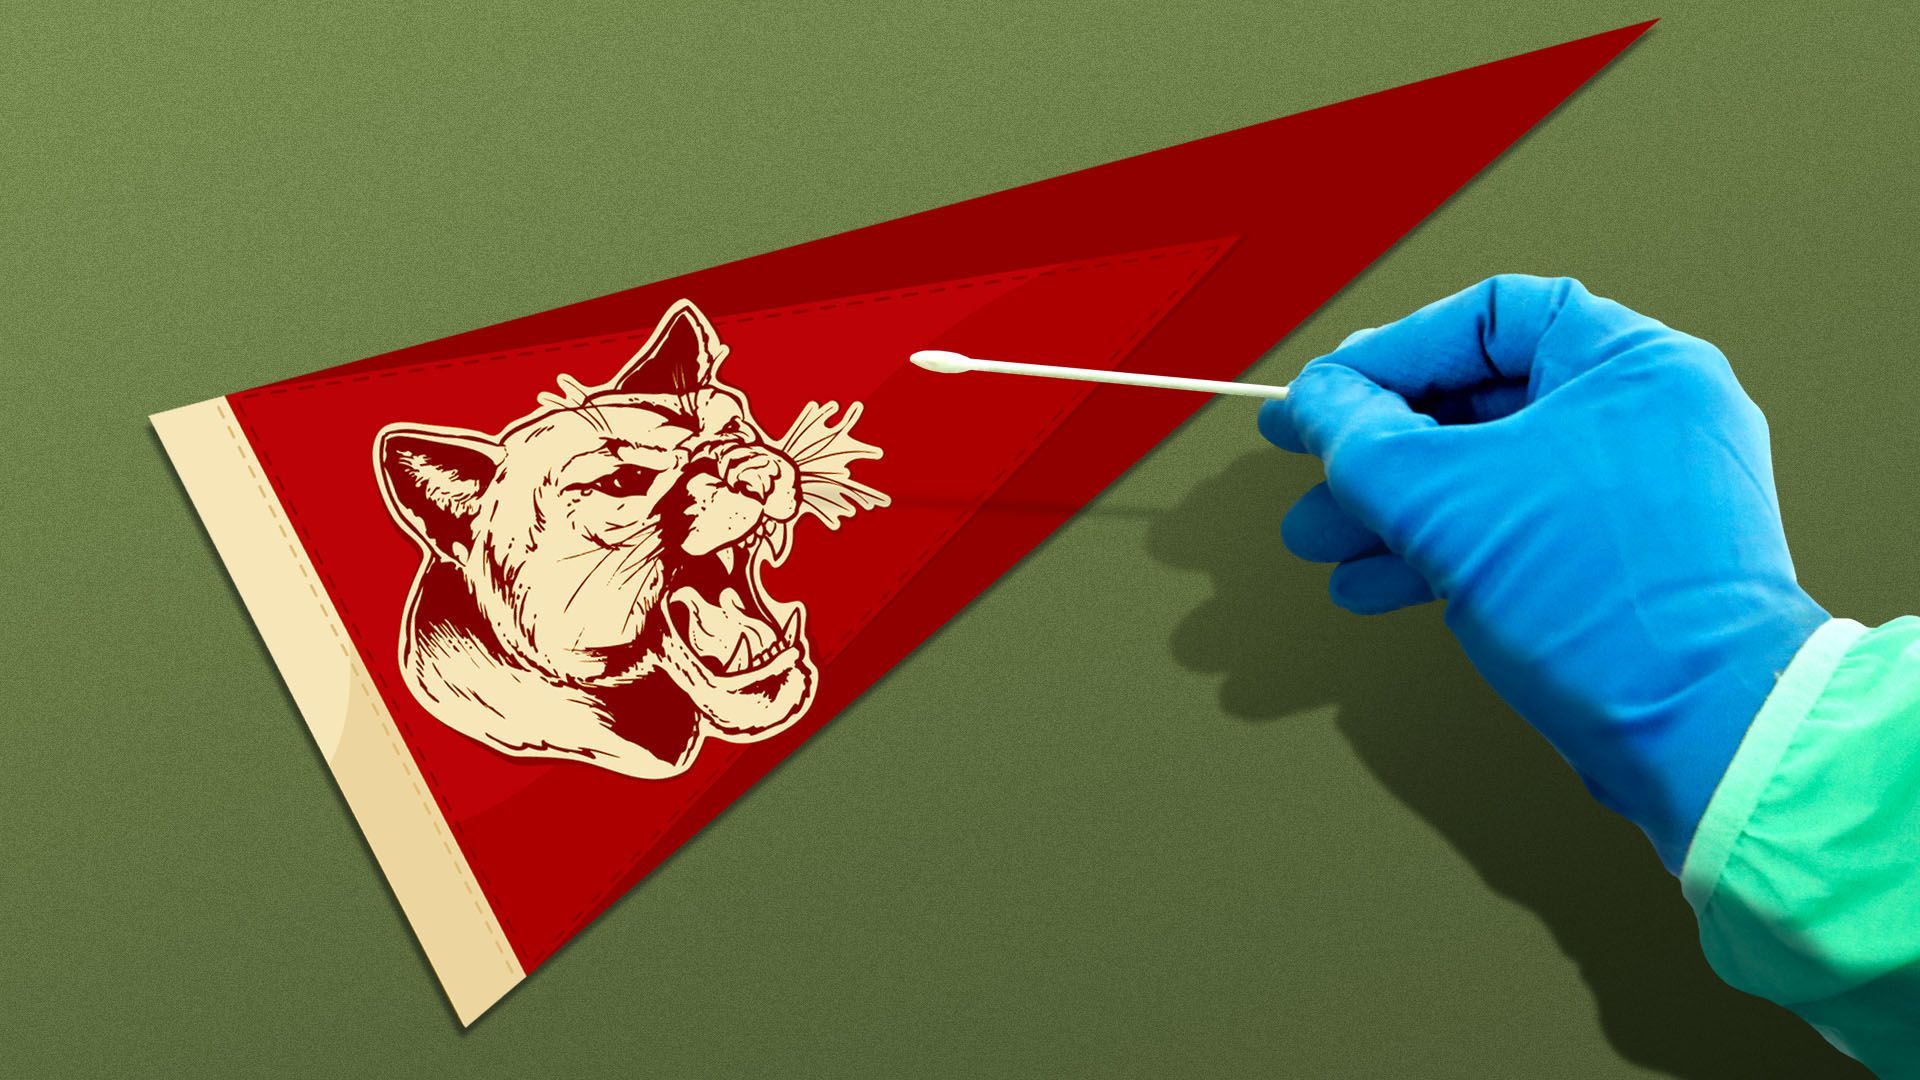 Illustration of a doctor about to do a nasal swab of a school pennant with a cougar on it